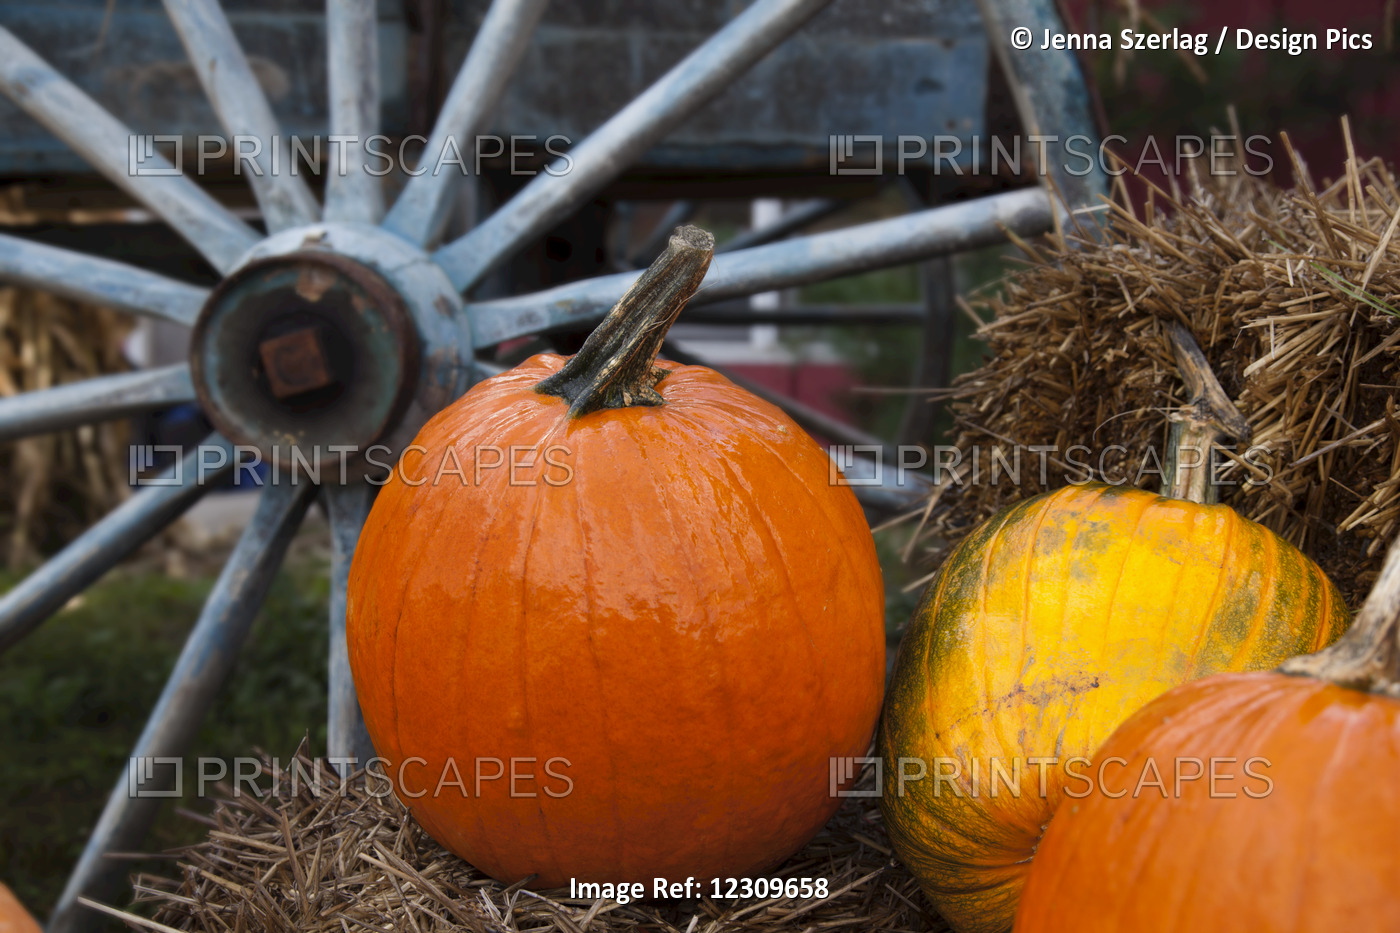 Pumpkins And Wagon Wheel; Stowe, Vermont, United States Of America